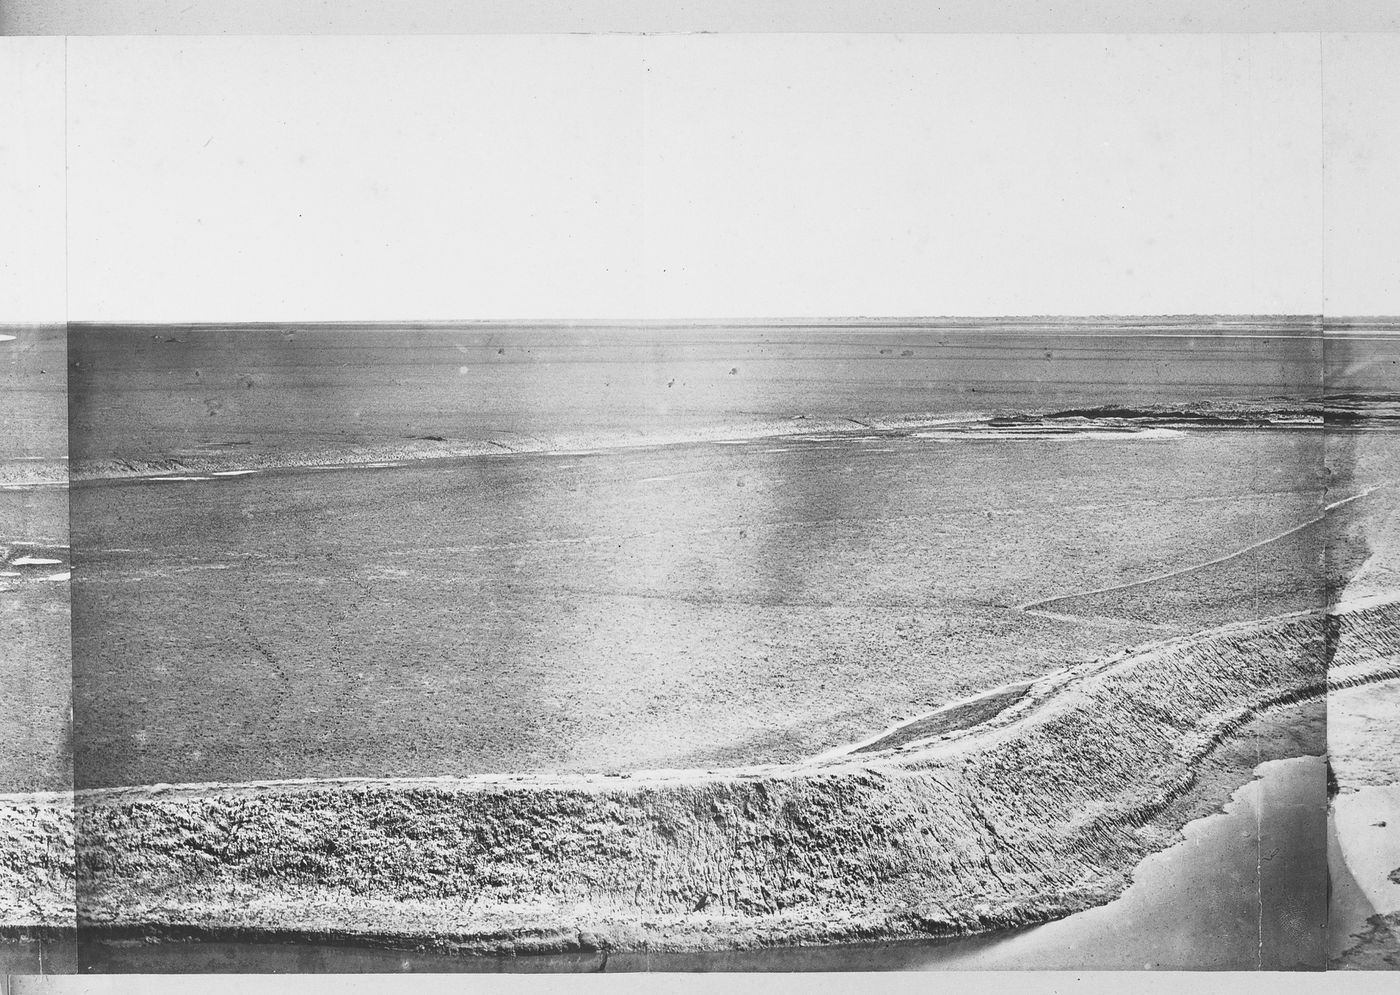 View showing the Pehtang (now Beitang) River delta and part of a moat, near Tientsin (now Tianjin), China